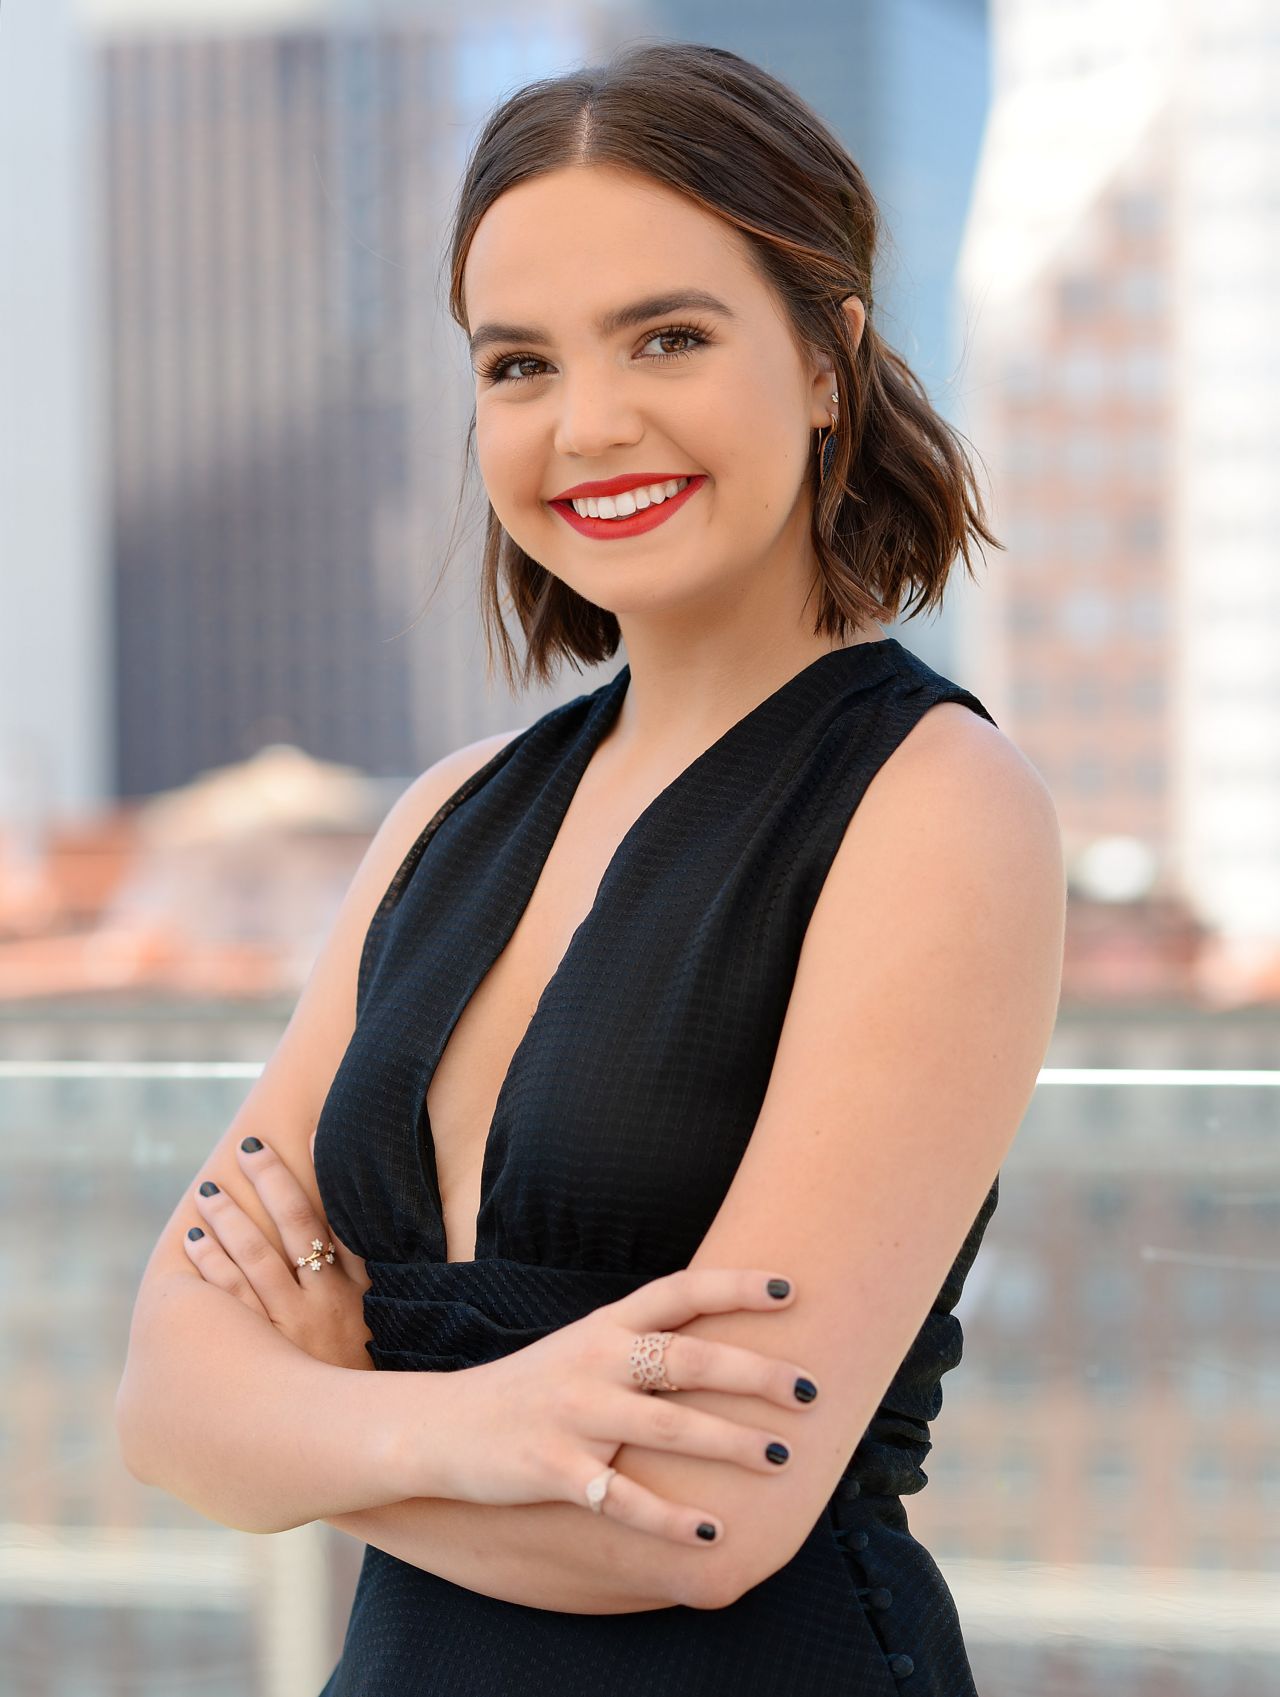 How tall is Bailee Madison?